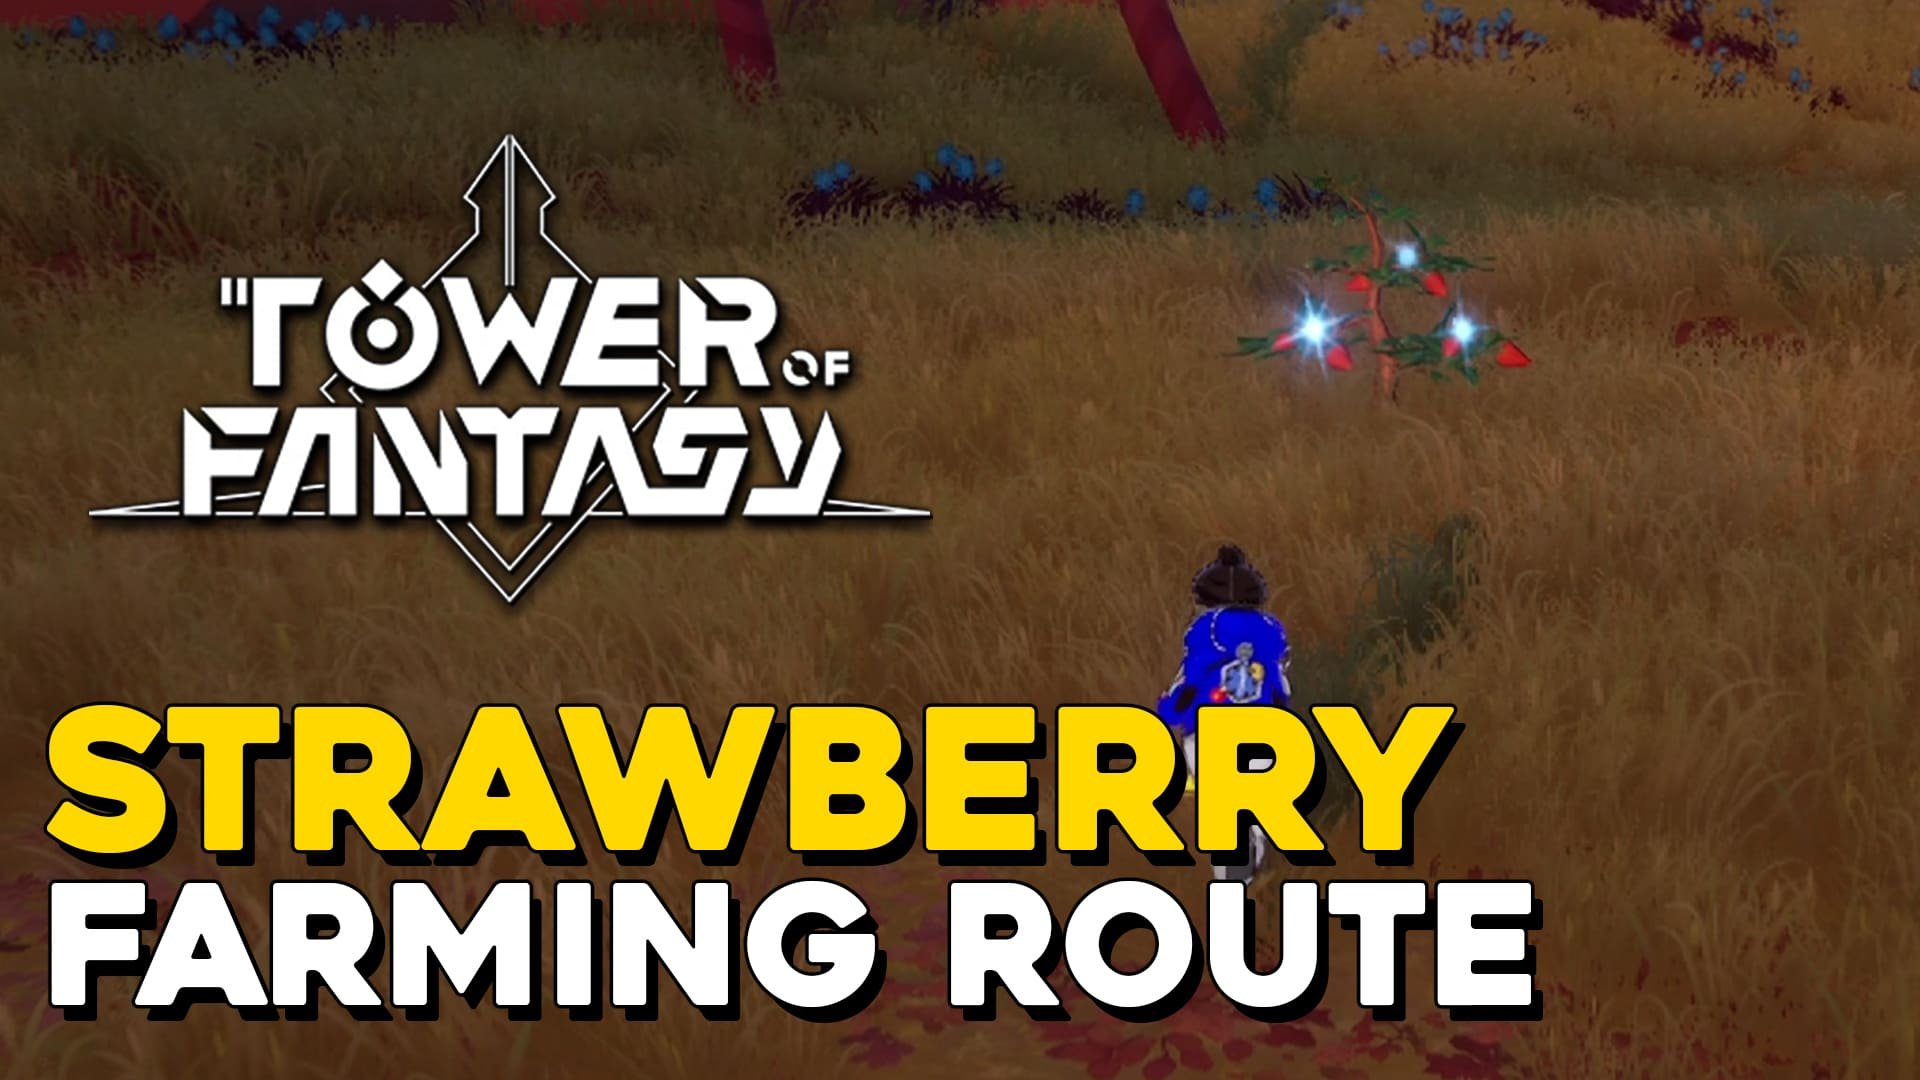 Tower Of Fantasy Strawberry Farming Route (Strawberry Locations).jpg